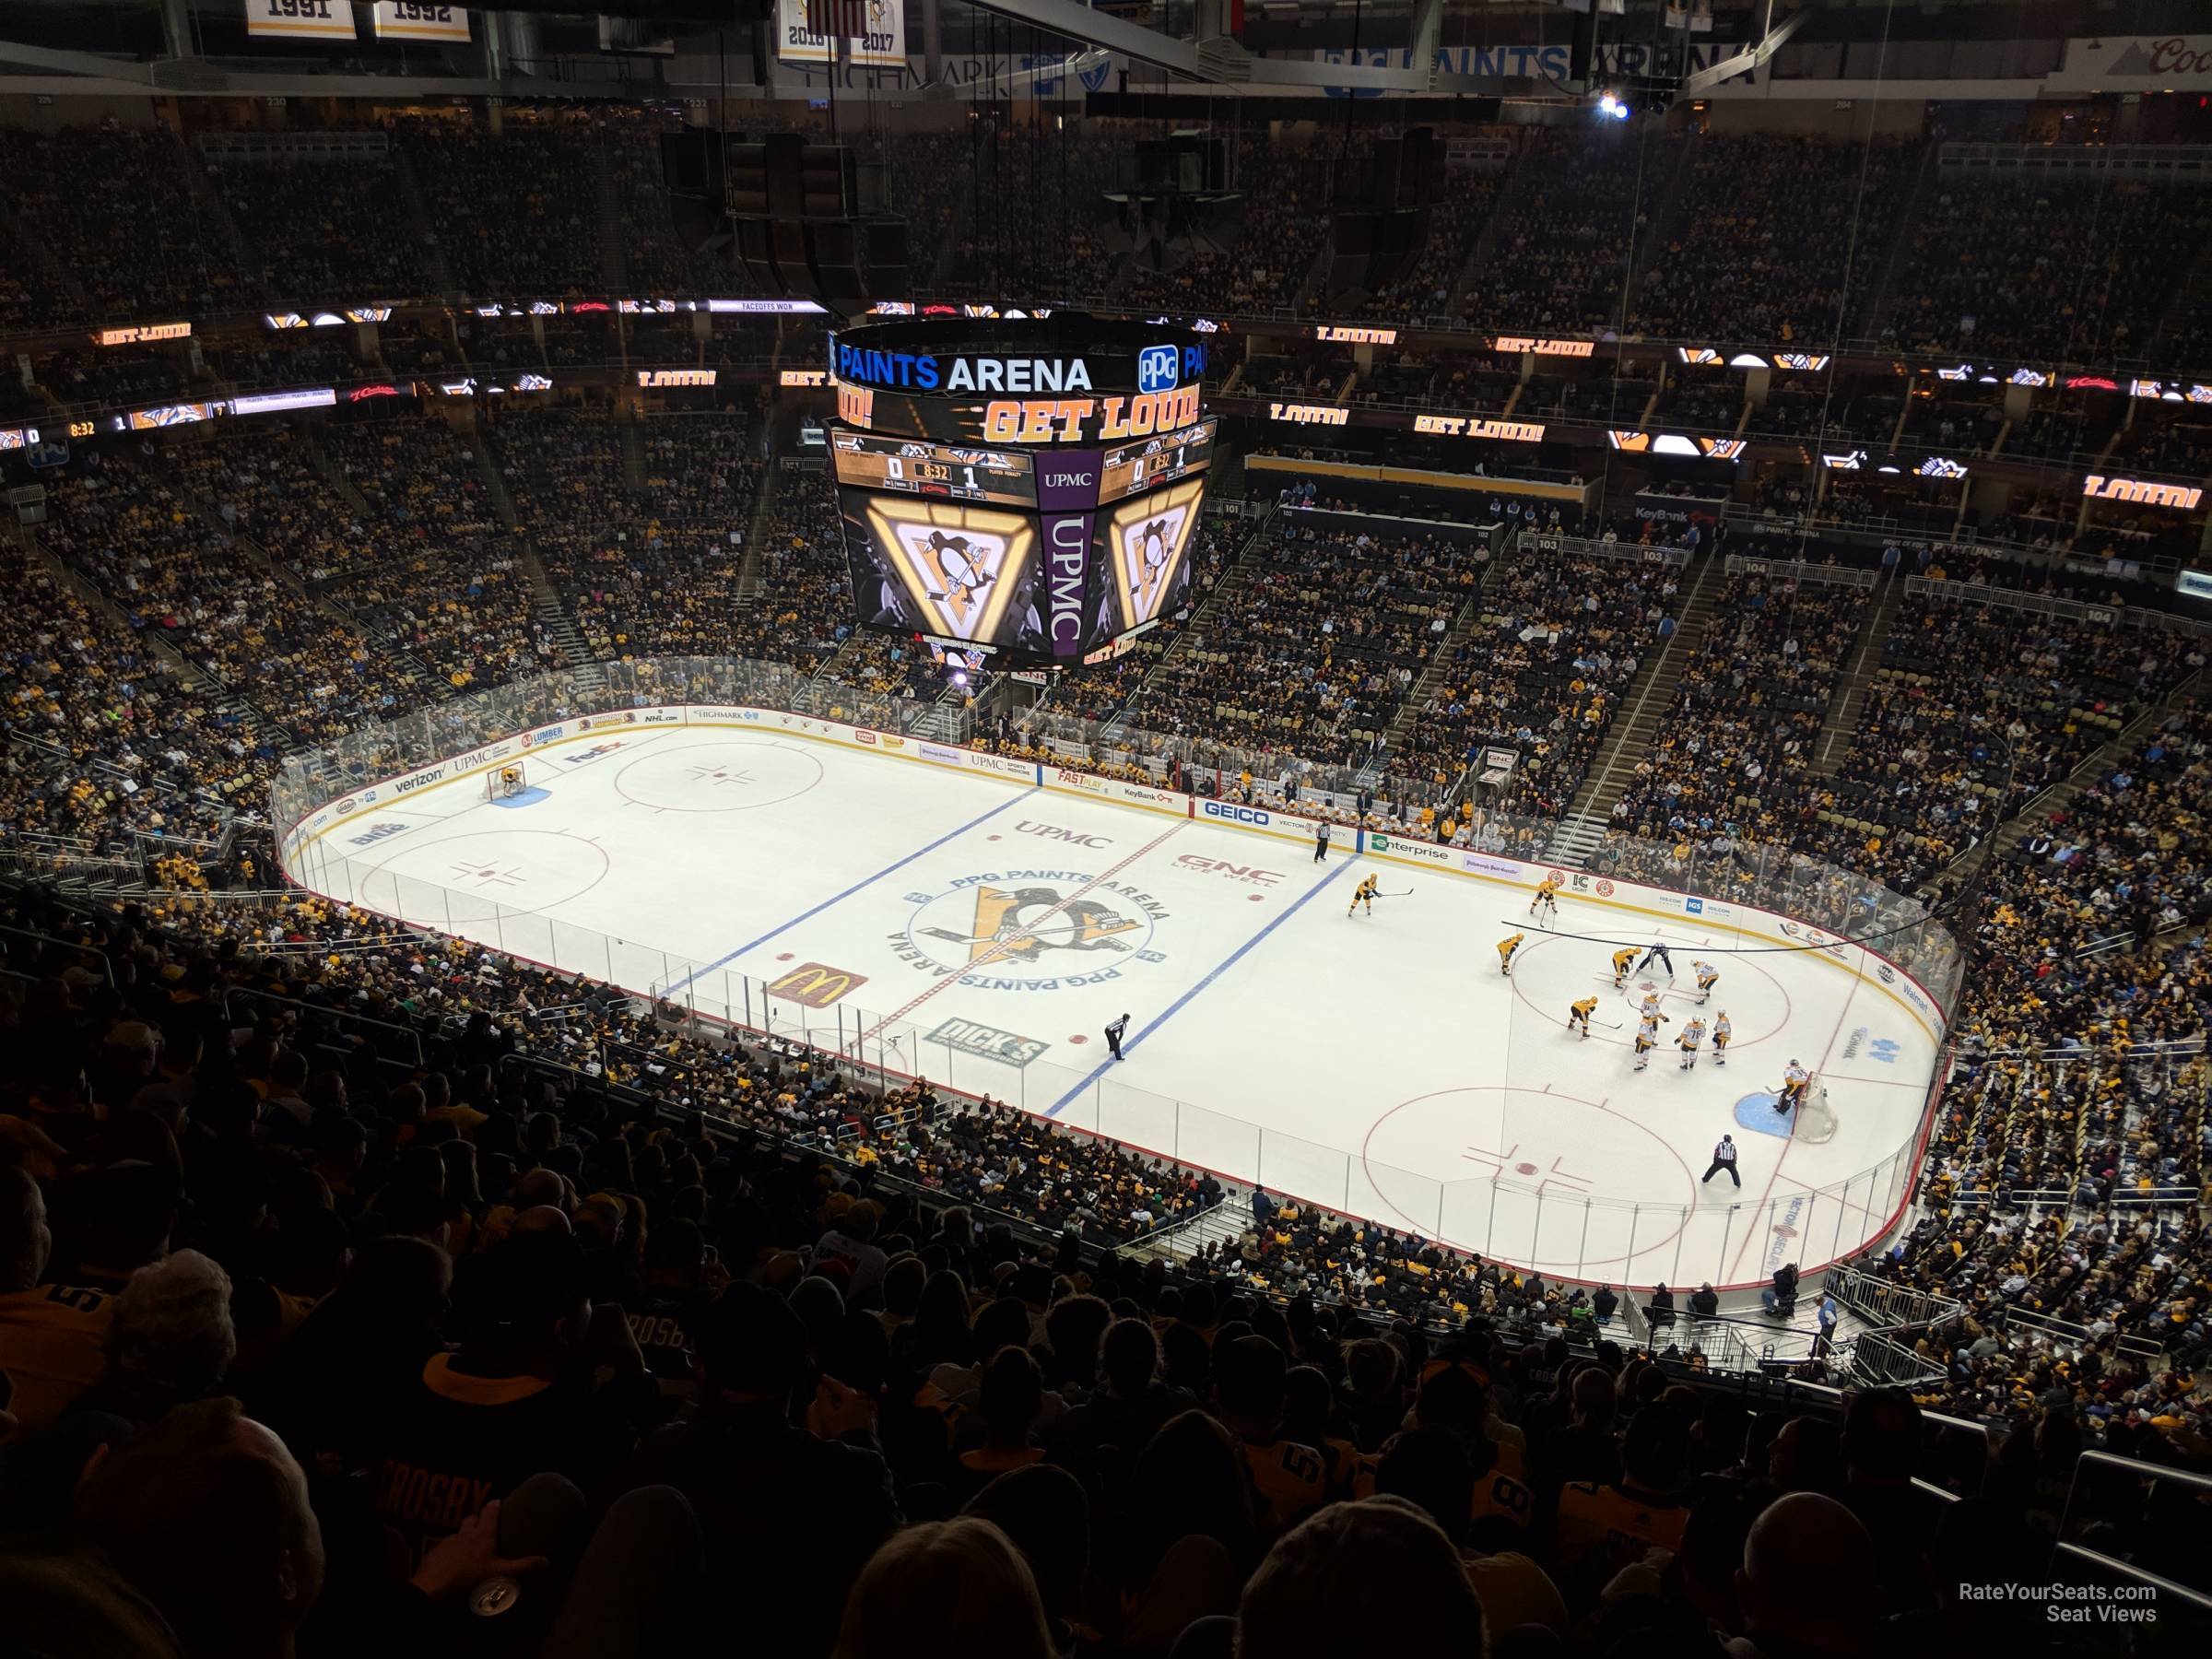 Section 212 at PPG Paints Arena 